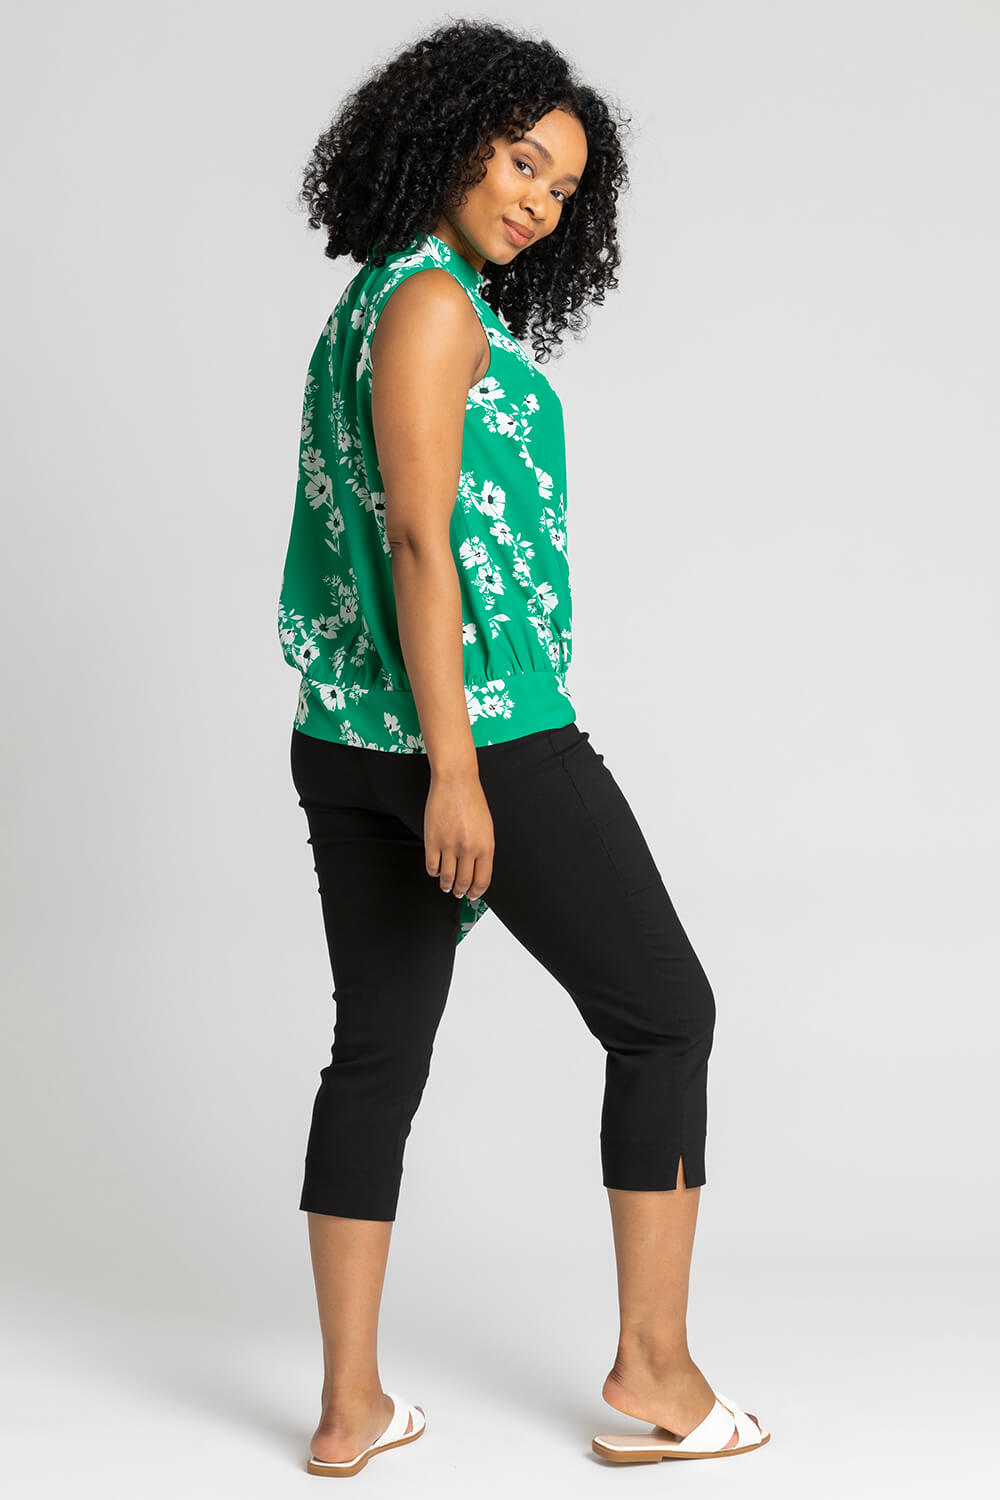 Green Petite Floral Print High Neck Tie Top, Image 2 of 5